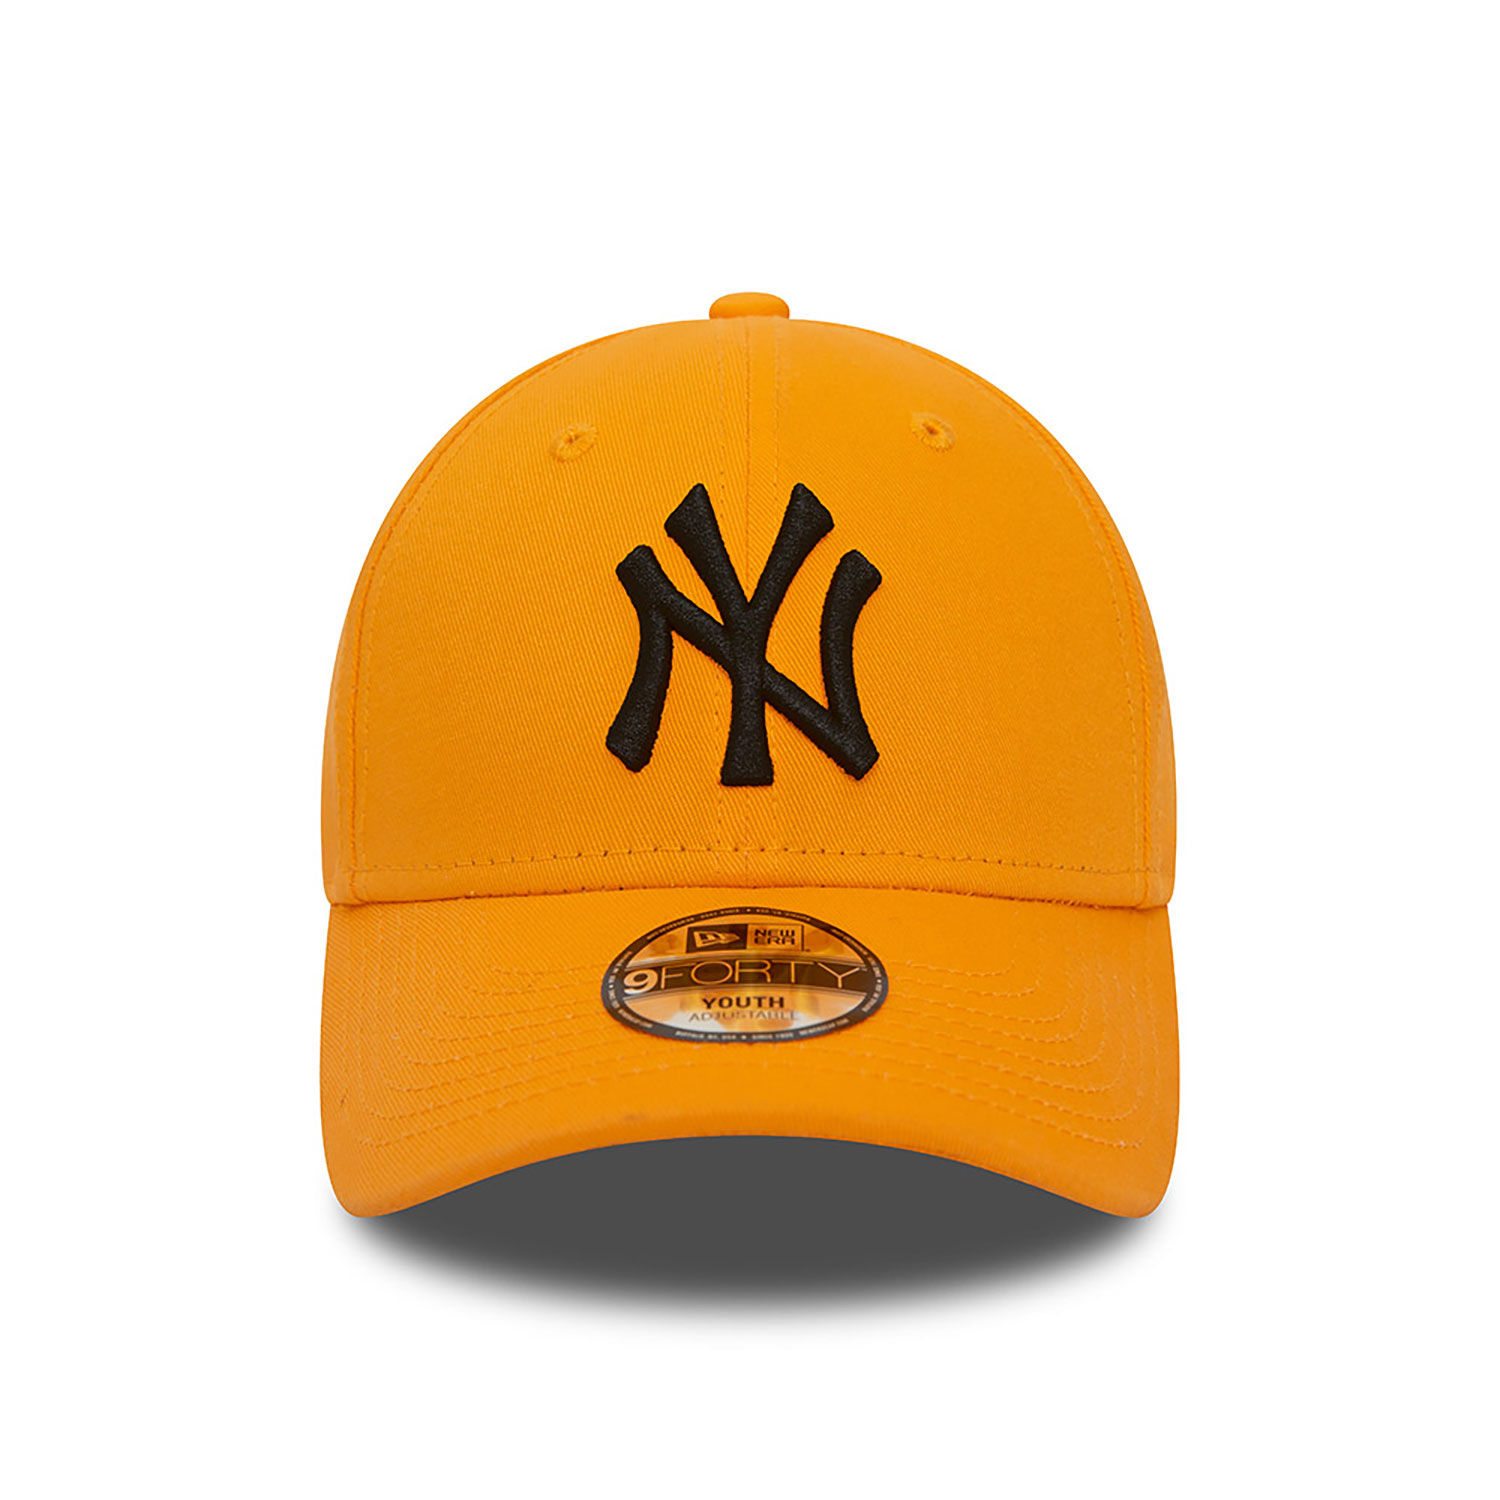 New York Yankees Youth League Essential Papaya Smoothie 9FORTY Adjustable Cap